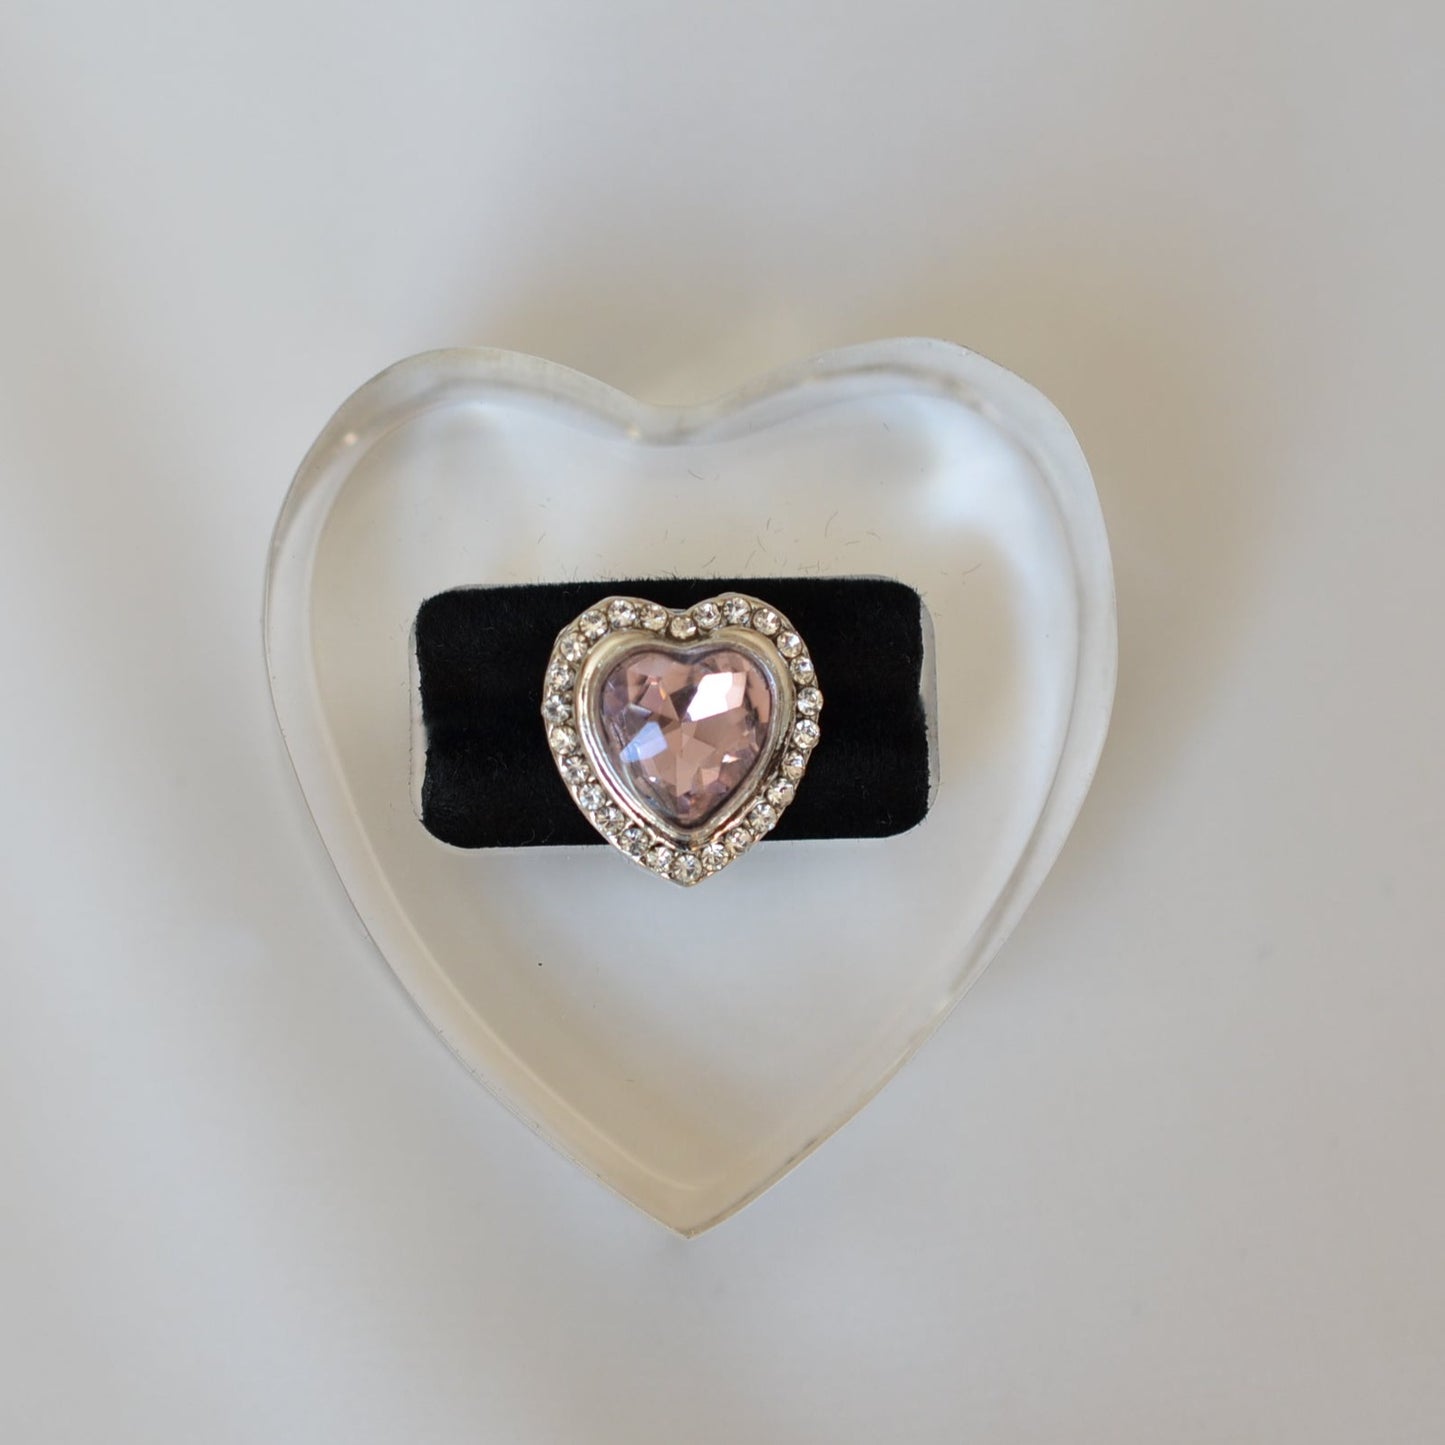 Pink Heart with Rhinestone Charm for belts, bags and watch bands